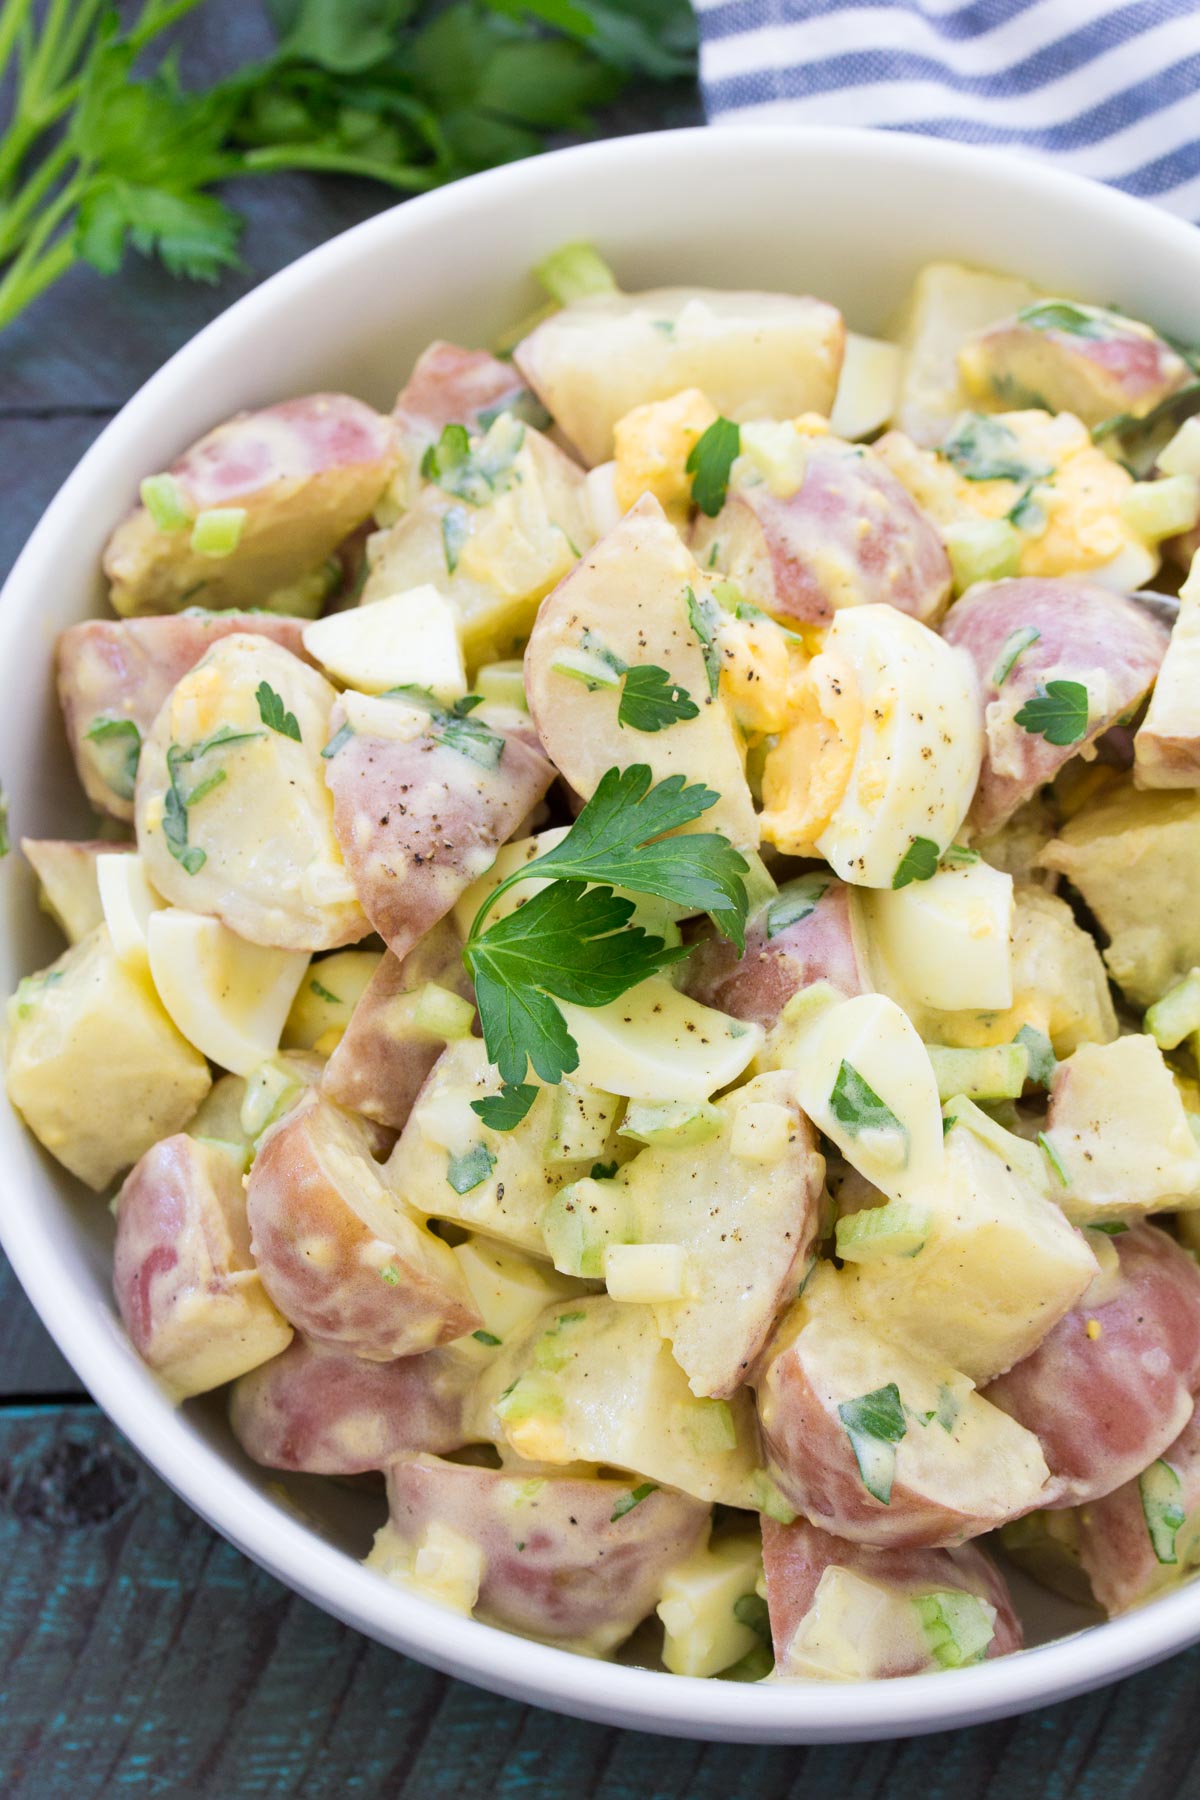 Red potato salad with hard boiled eggs in a white bowl.